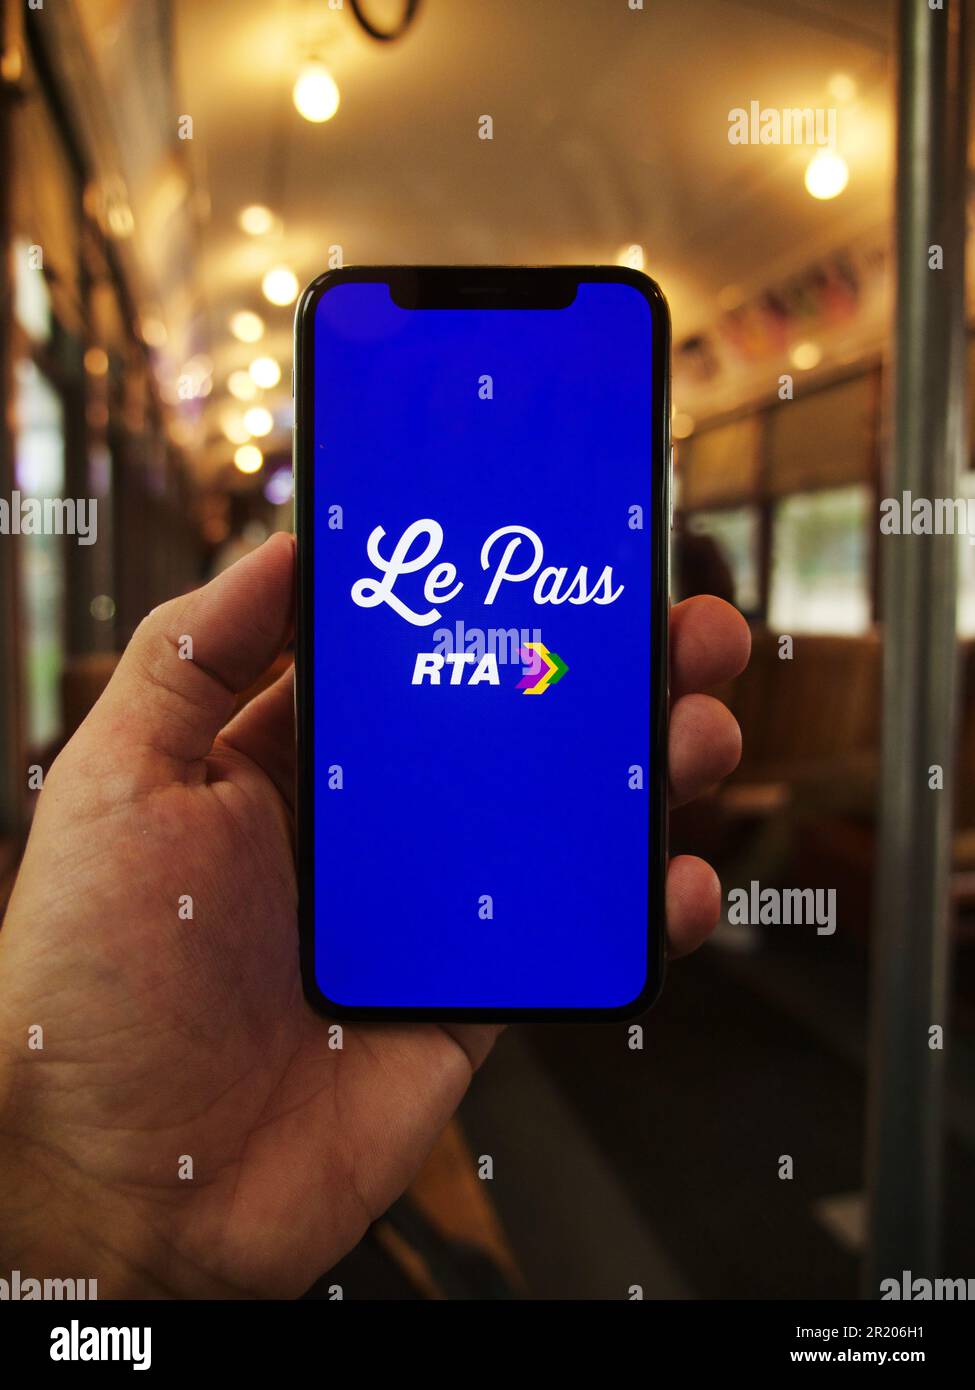 A person holding a smartphone, displaying a le pass rta logo on the screen Stock Photo